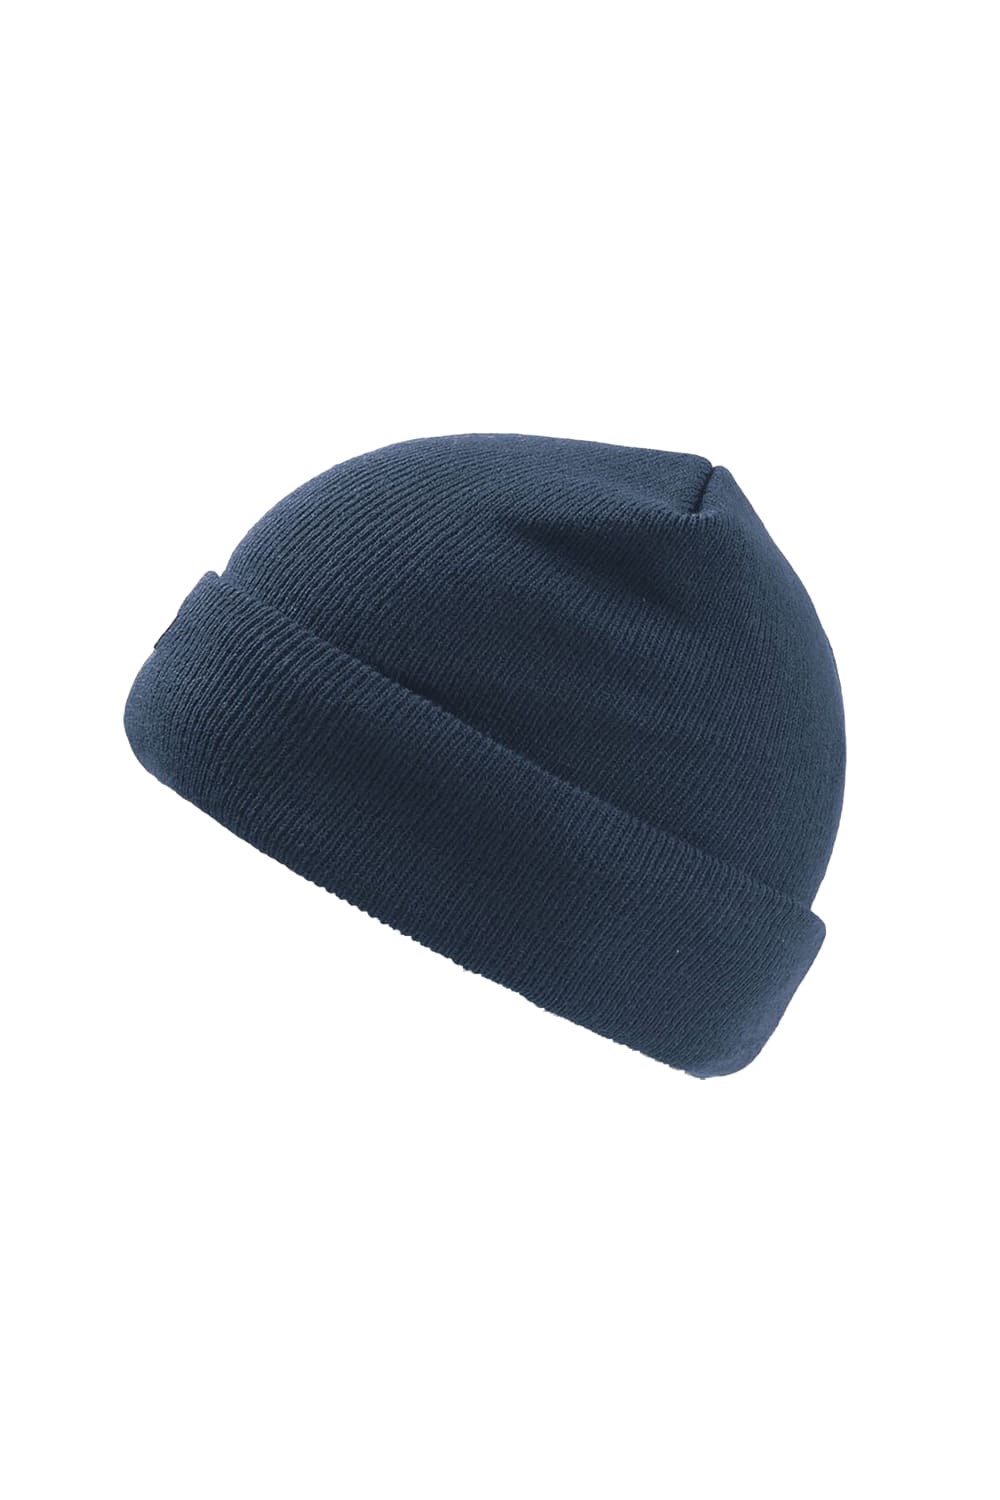 Atlantis Pier Thinsulate Thermal Lined Double Skin Beanie (Navy)